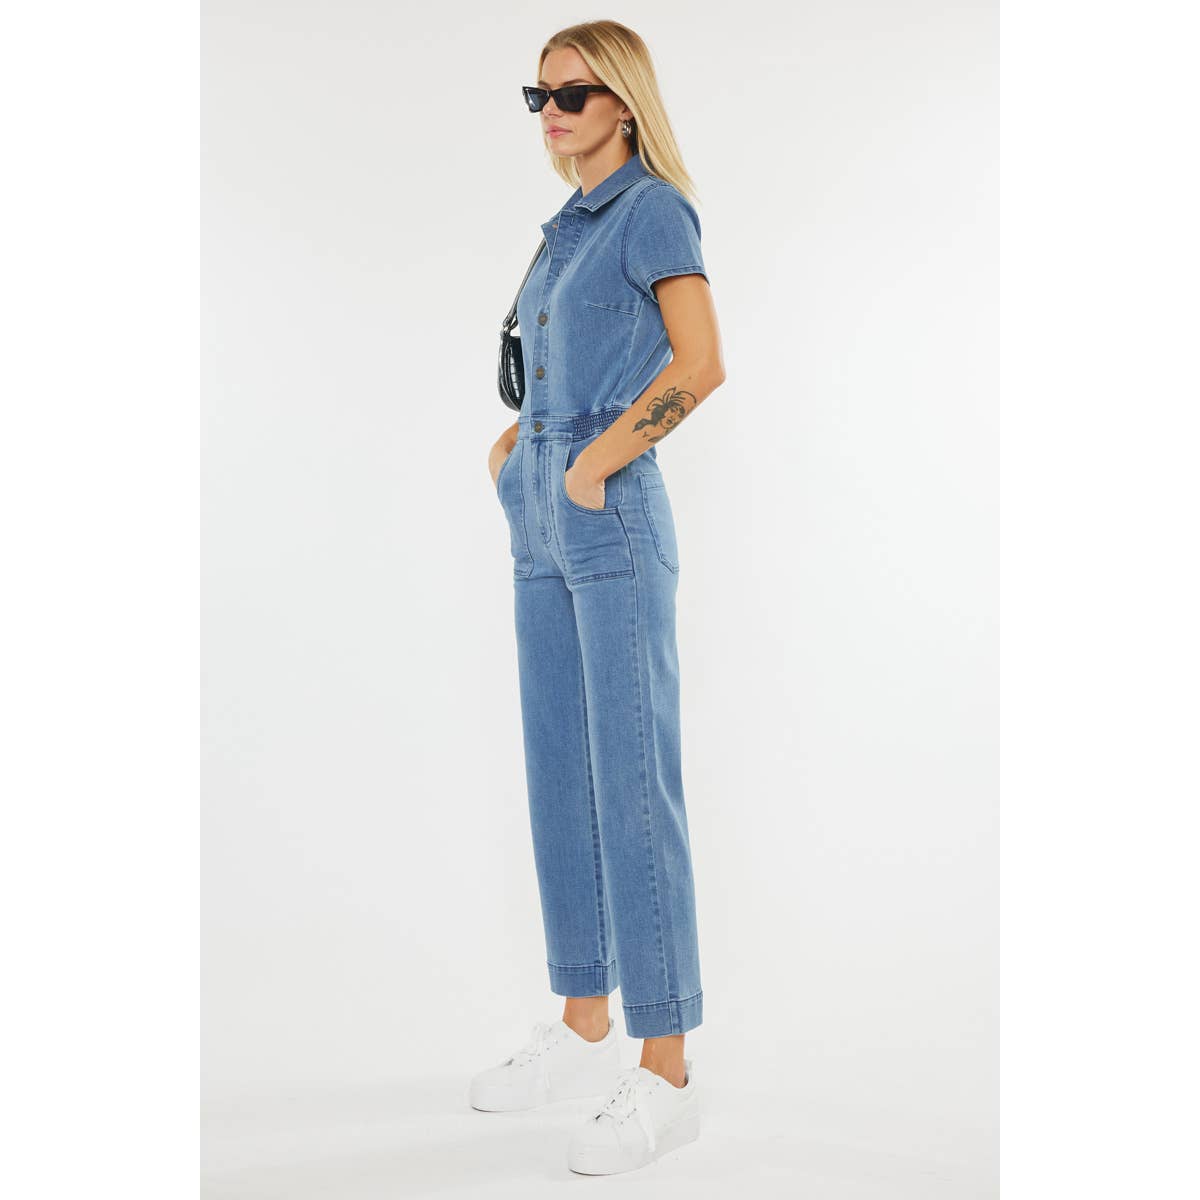 Denim Jumpsuit by Kan Can